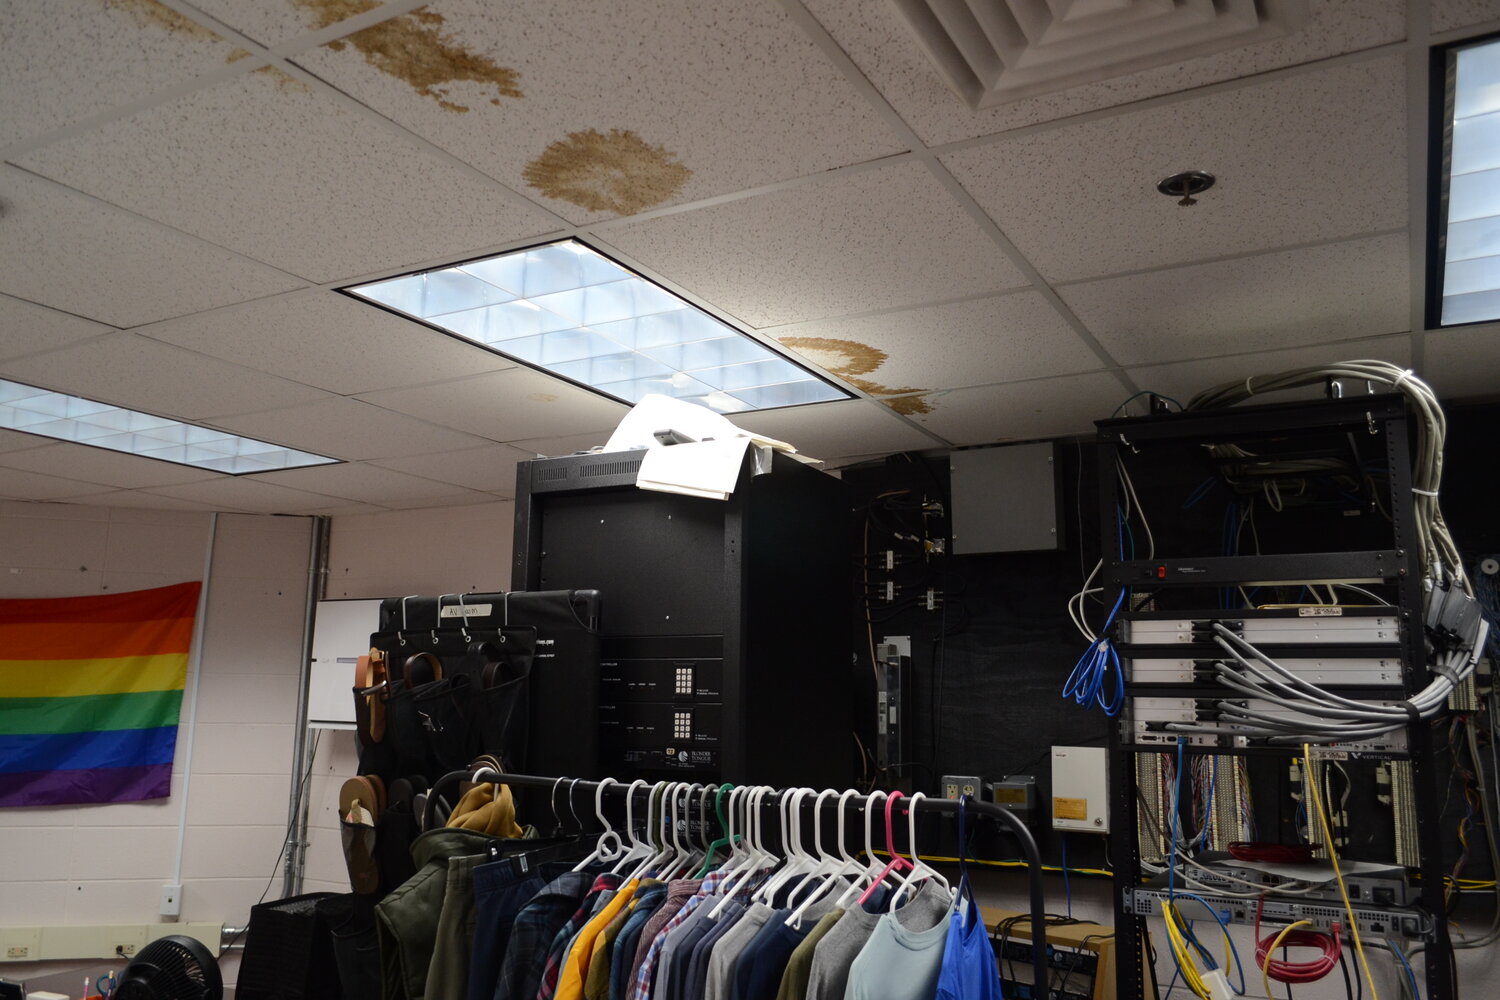 A stack of computer servers sits underneath visibly water damaged ceiling tiles in a room that also serves as a makeshift space for student volunteer work.